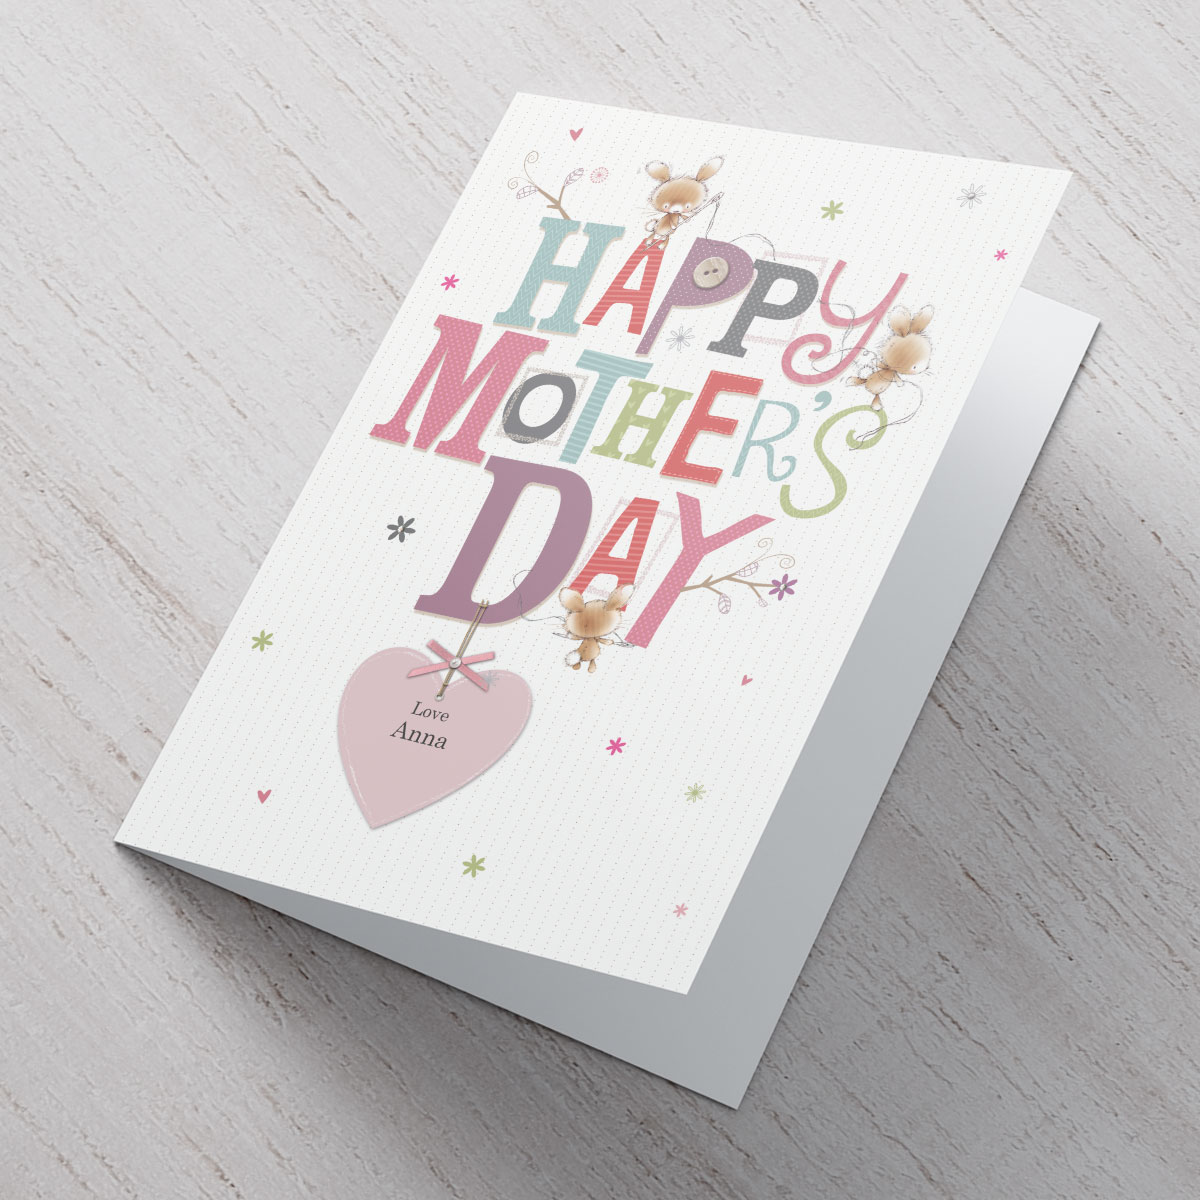 Personalised Mother's Day Card - Sewing Mice